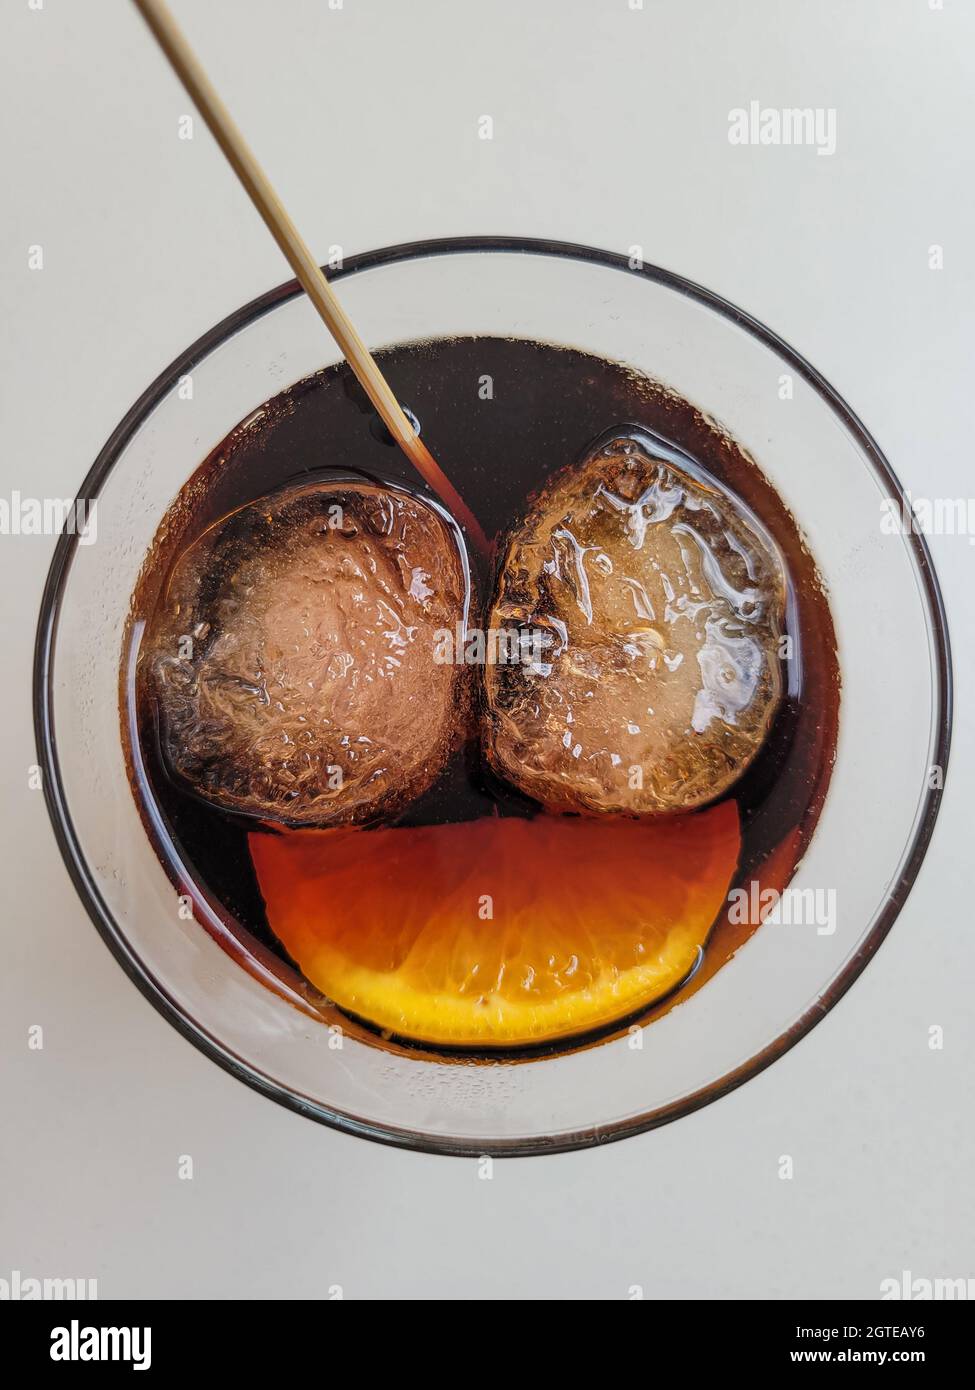 Two ice cubes and an orange slice in a drink symbolizing a smiling face. Happiness, carpe diem, enjoy the good times concept Stock Photo